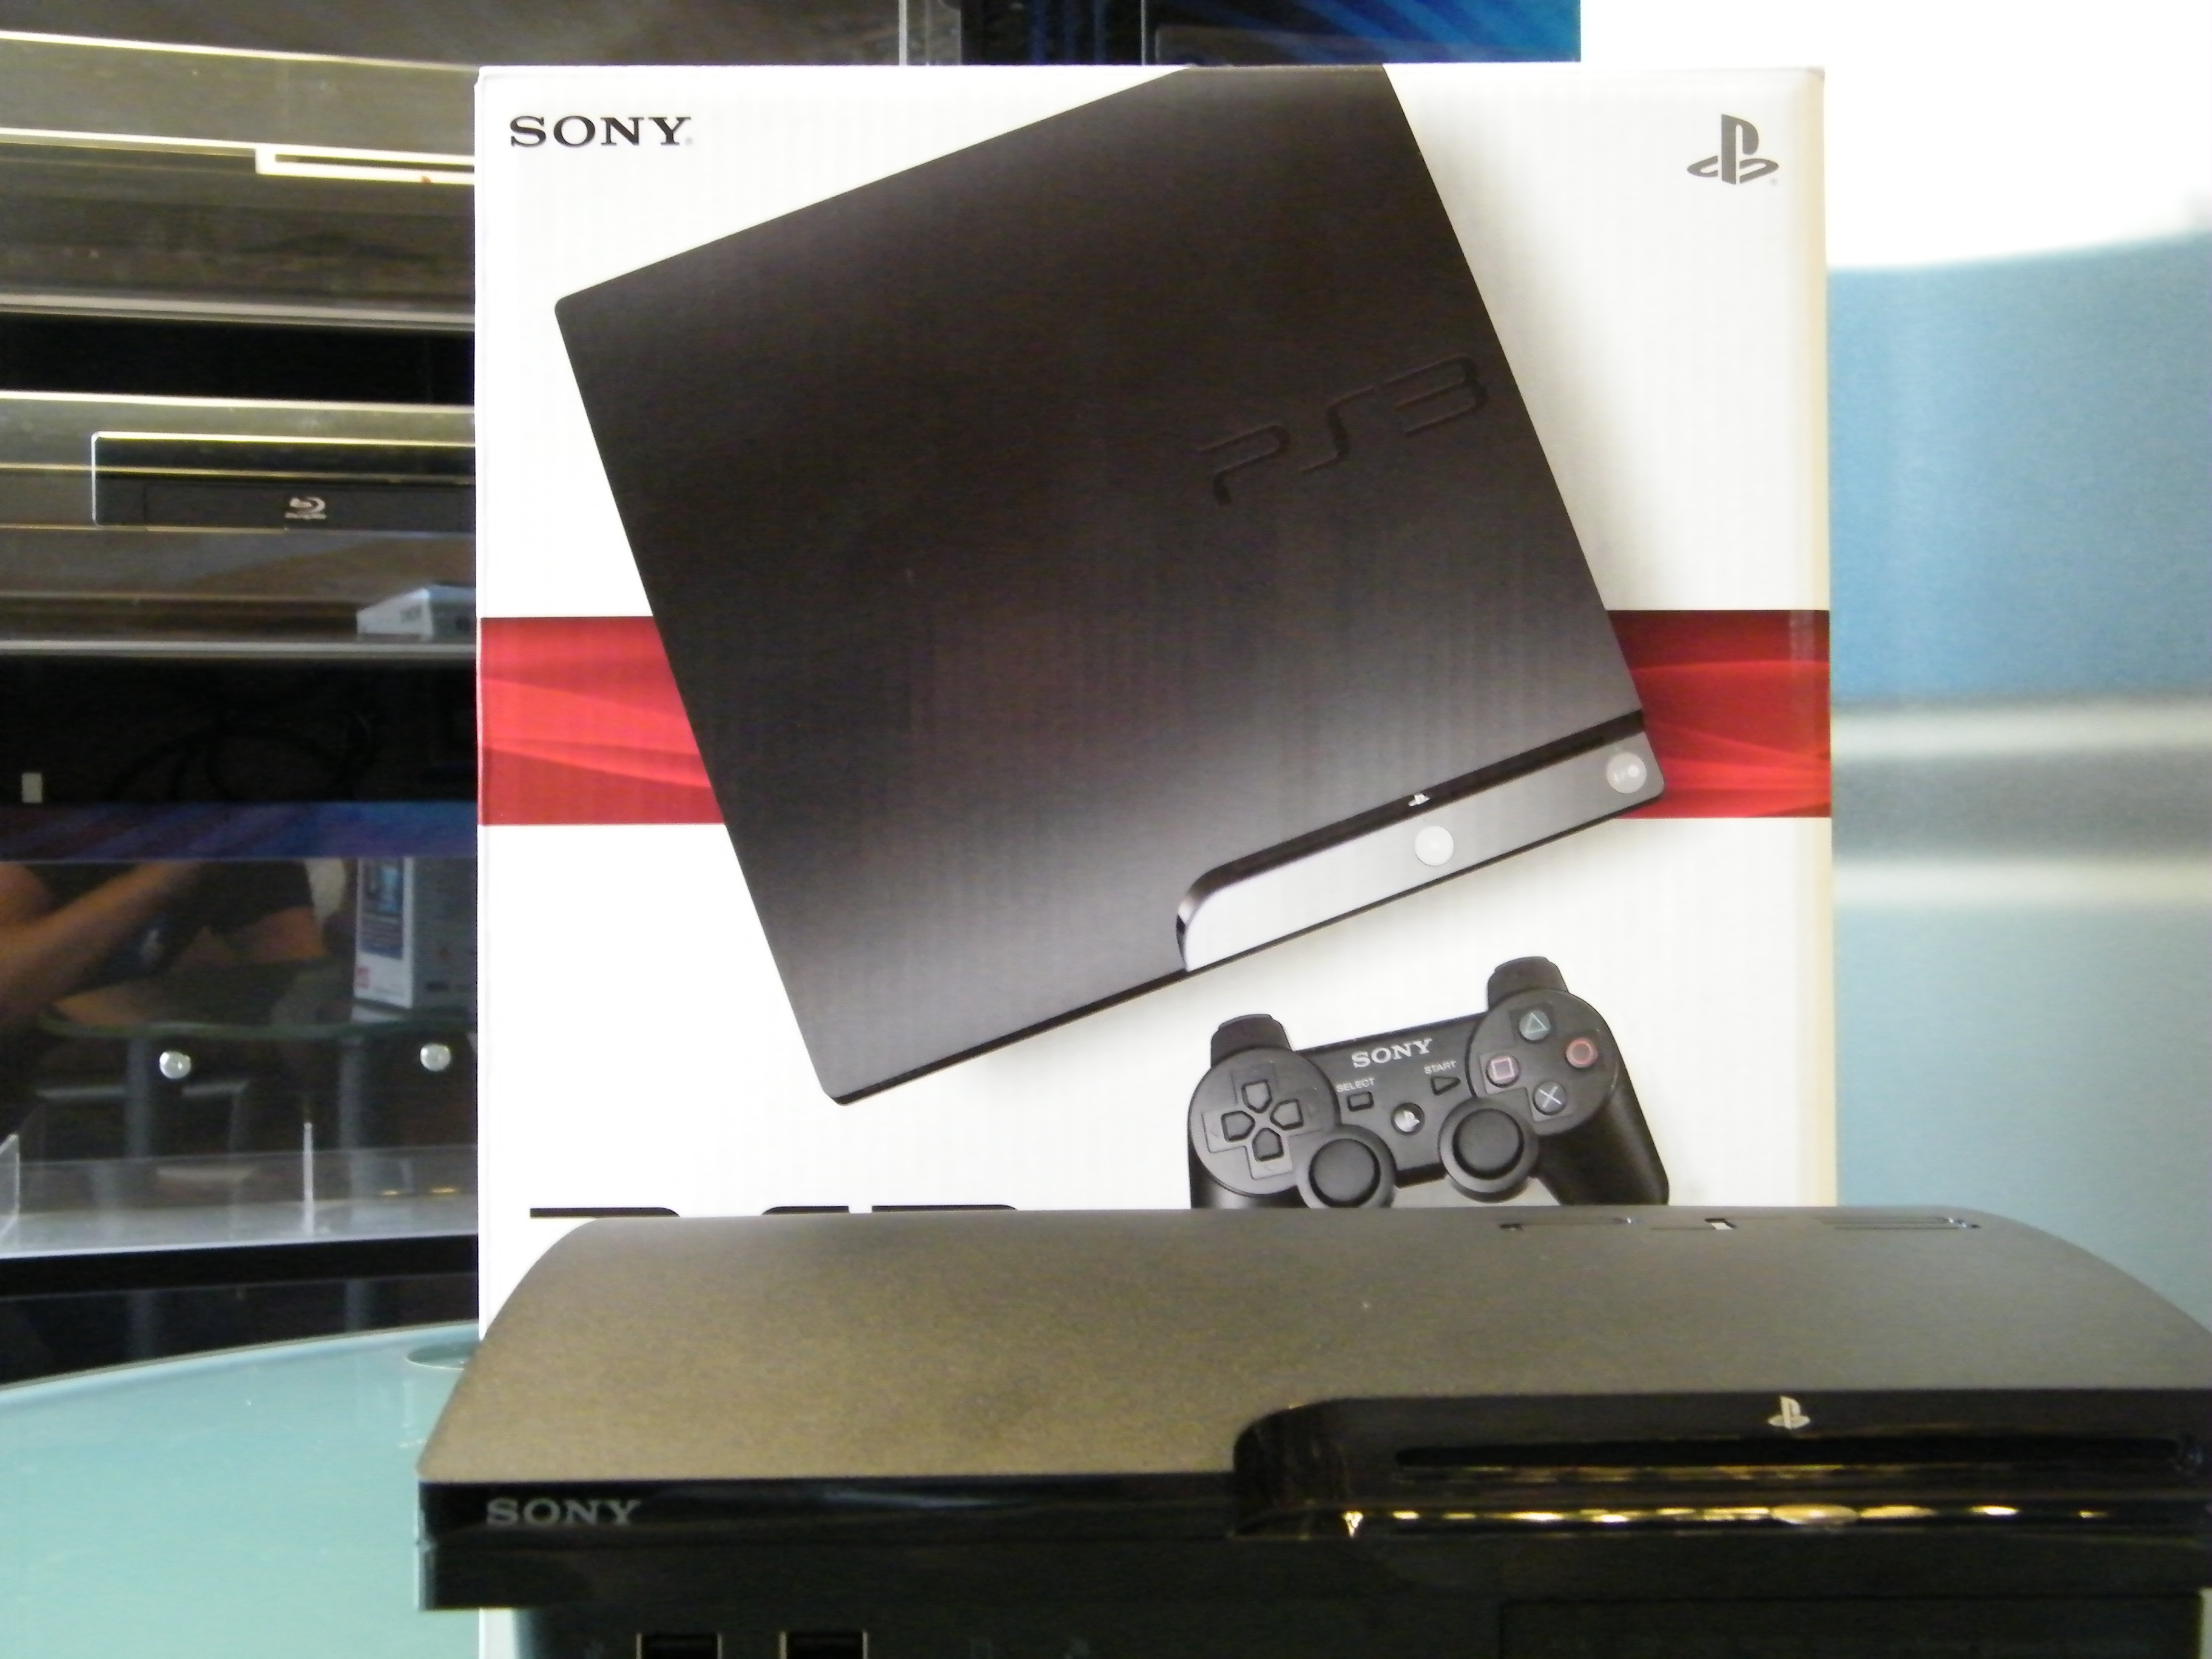 Sony PlayStation 4 Slim Unboxing, Setup and Impressions 